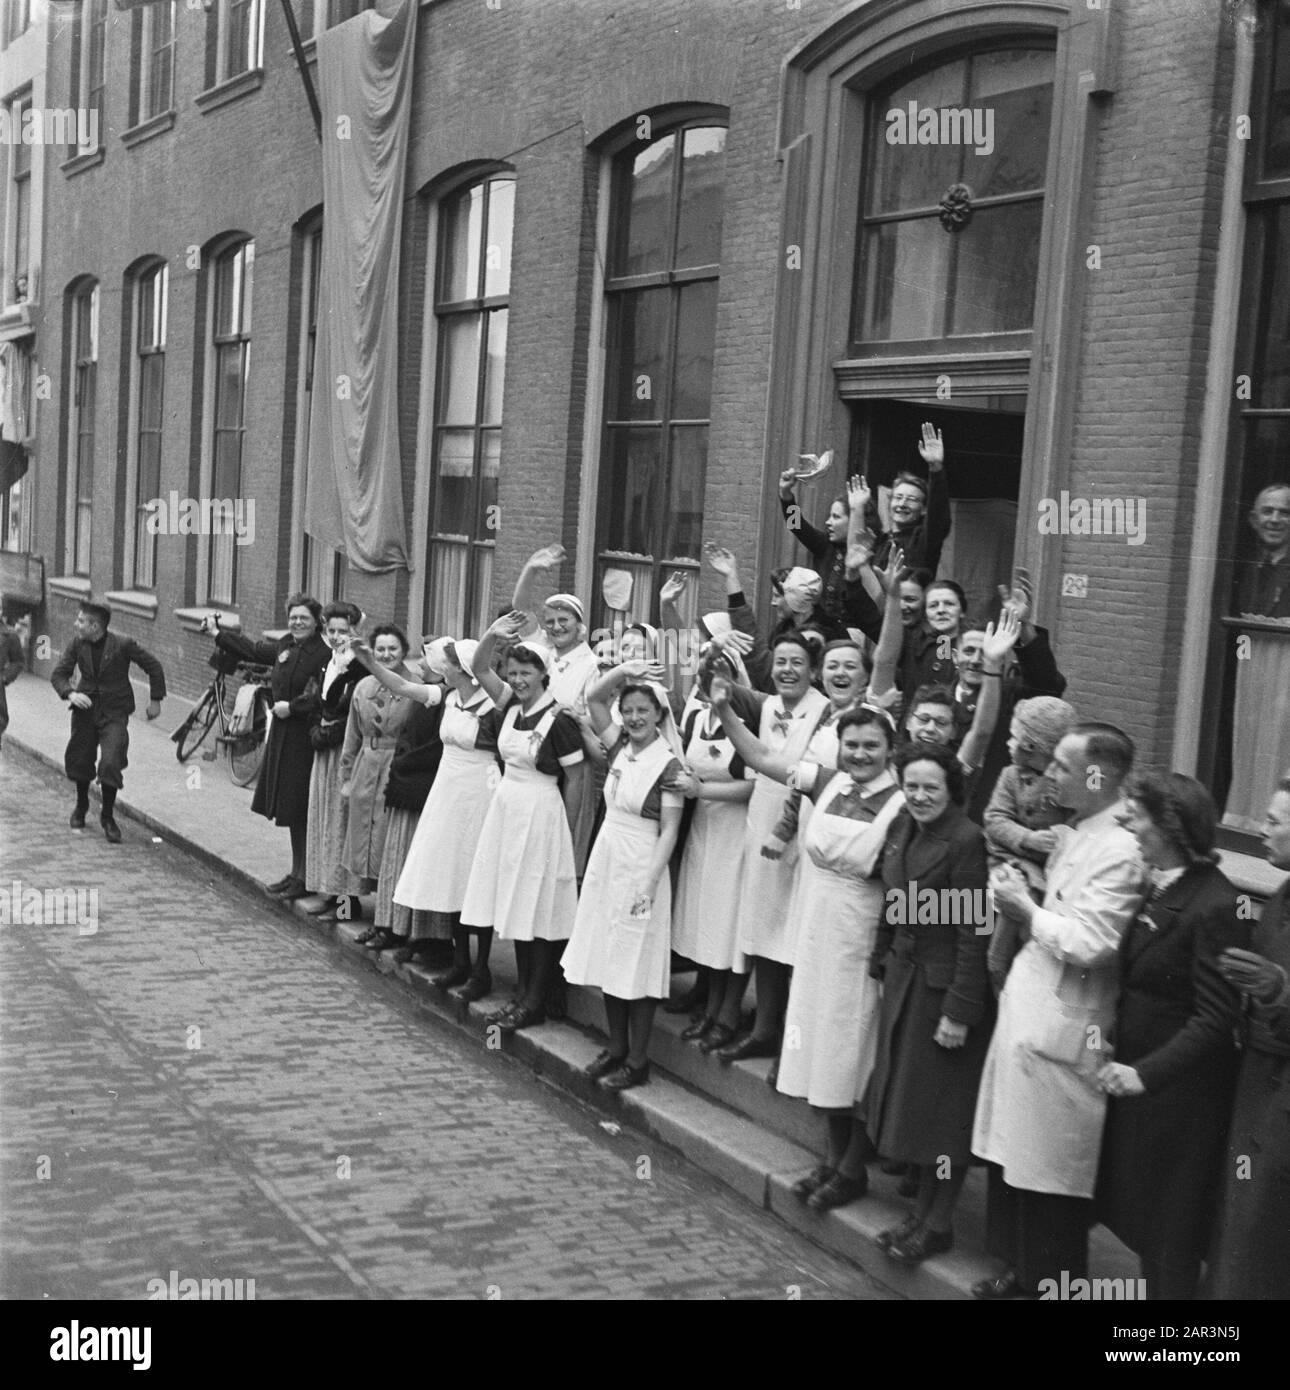 Tour of Queen Wilhelmina through liberated South Netherlands (Zeeland, Brabant and Limburg)  On her tour through Zeeland, Brabant and Limburg, Queen Wilhelmina arrives at half past eleven in Middelburg (photo caption Anefo). Waving nurses Date: March 15, 1945 Location: Middelburg, Zeeland Keywords: liberation, royal visits, World War II Stock Photo